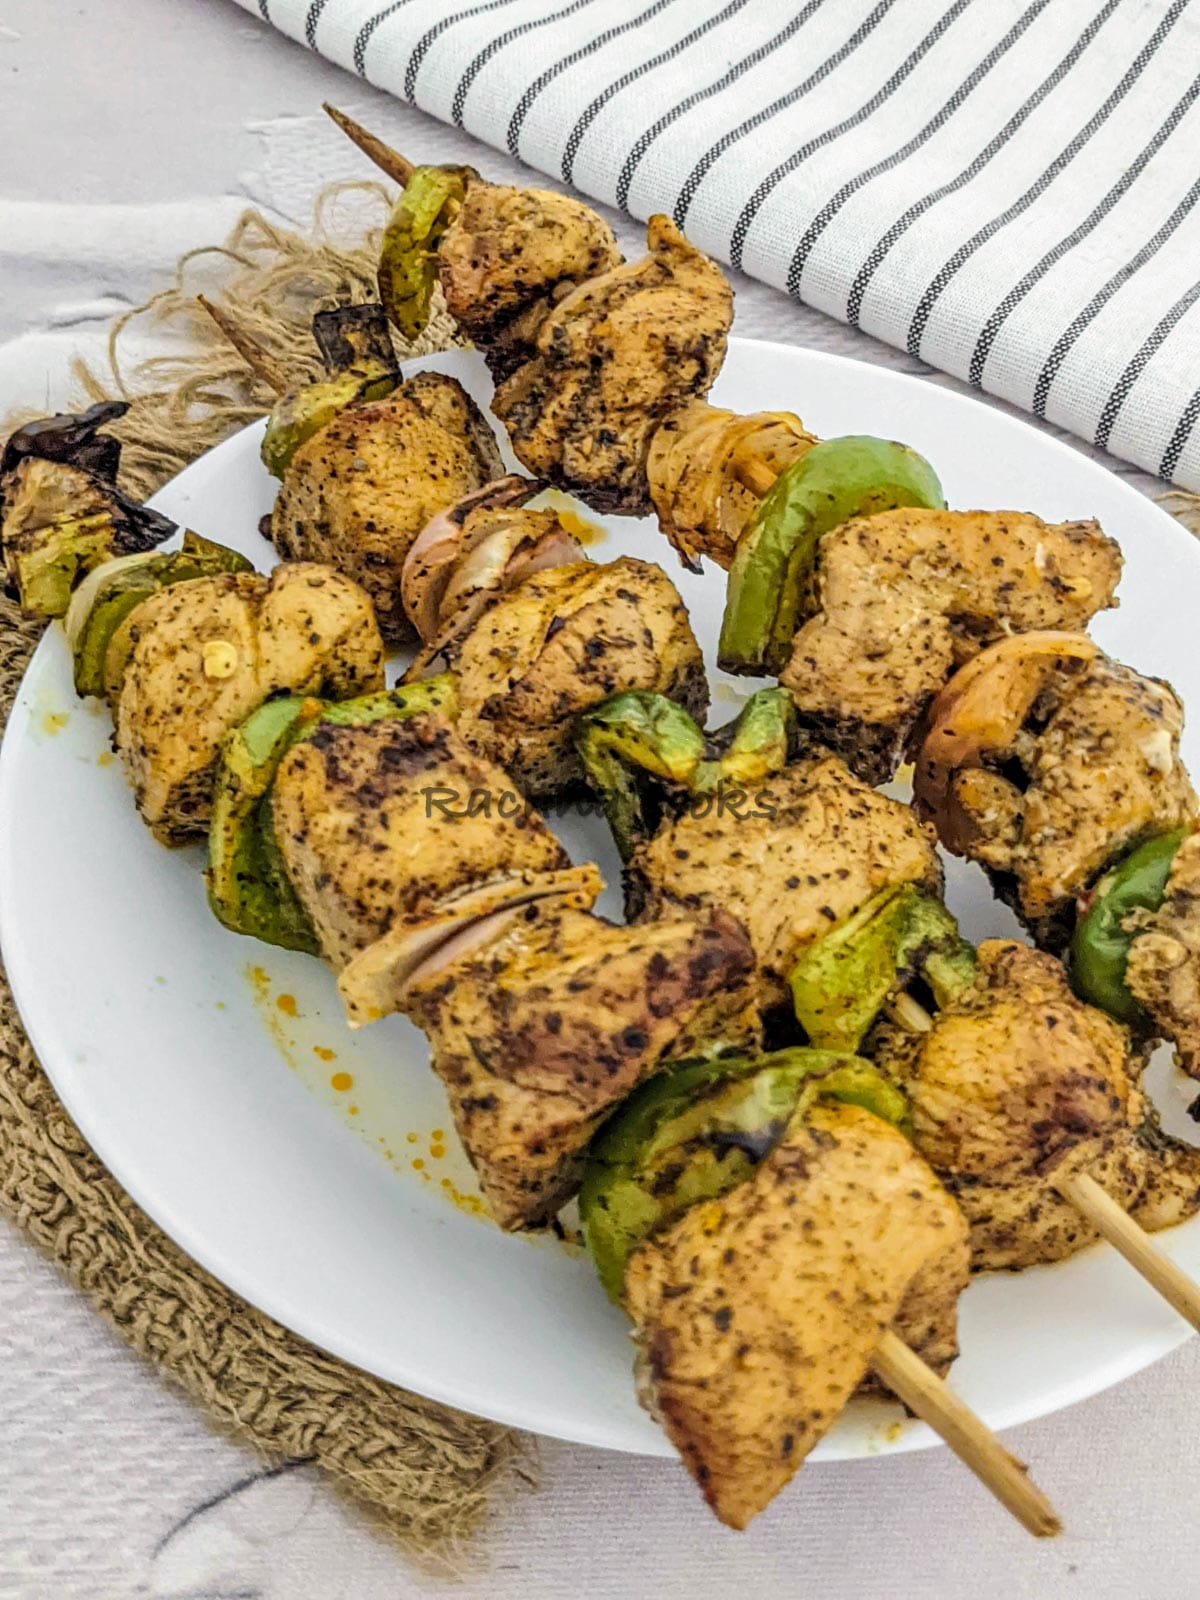 3 skewers of chicken kabob after air frying in a white plate.